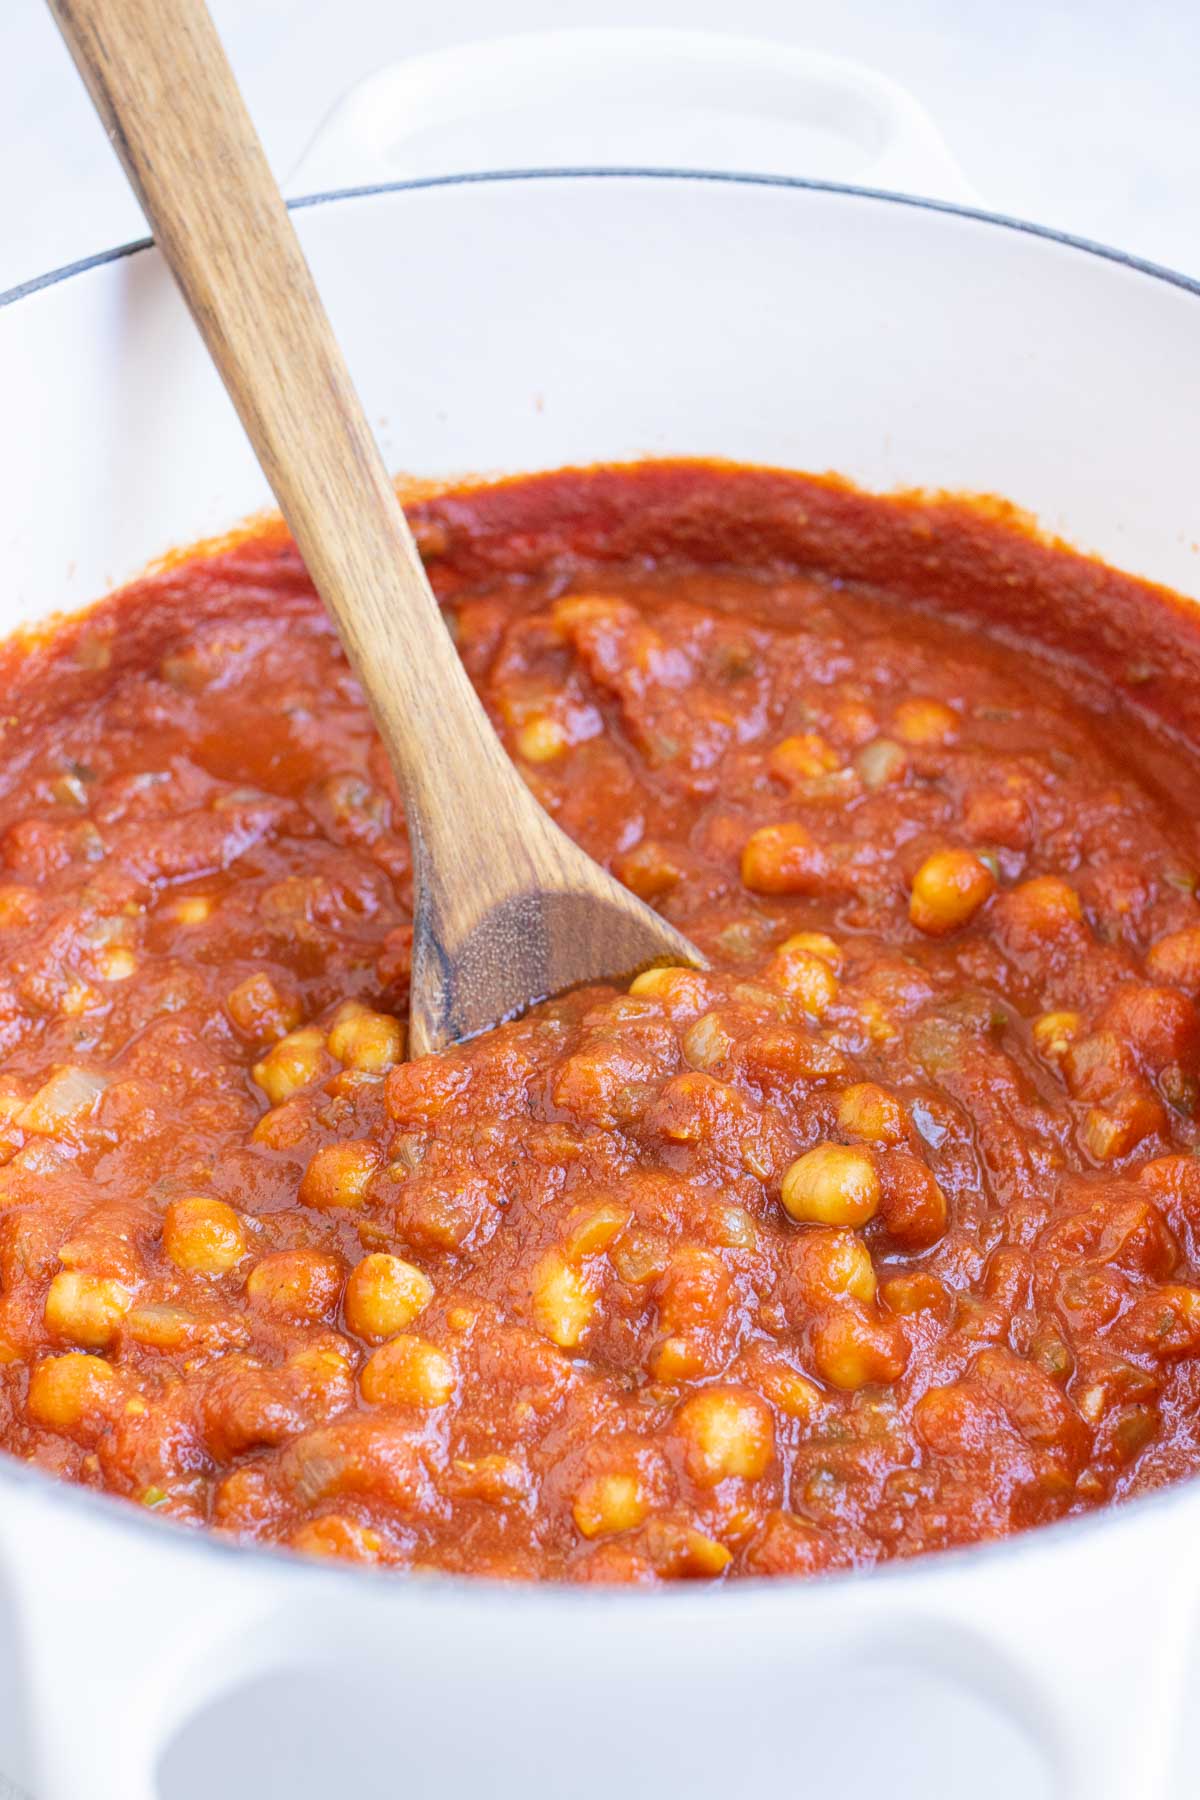 Chana masala is simmered for extra flavor.